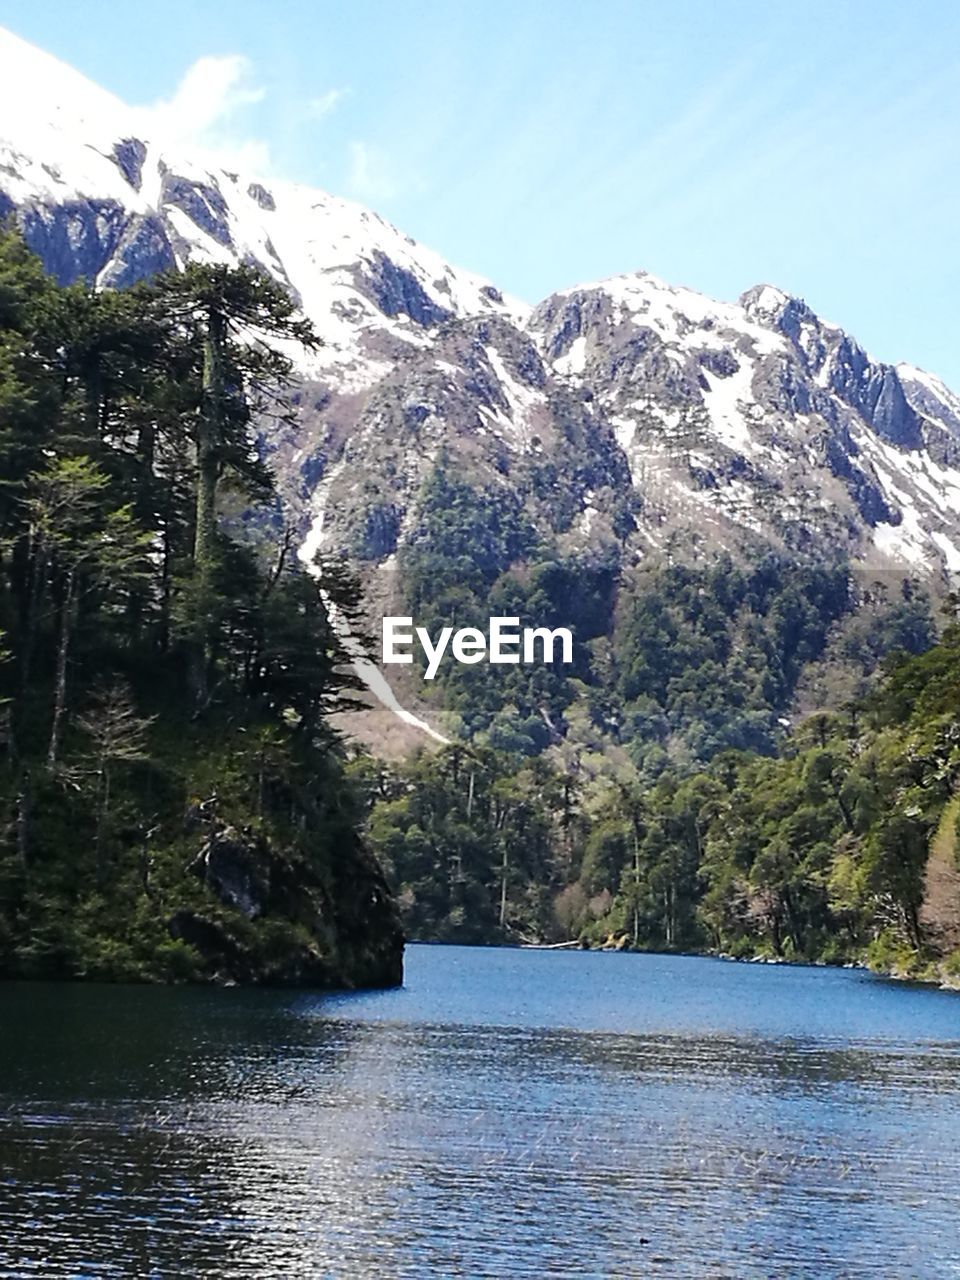 SCENIC VIEW OF SNOWCAPPED MOUNTAINS BY LAKE AGAINST SKY